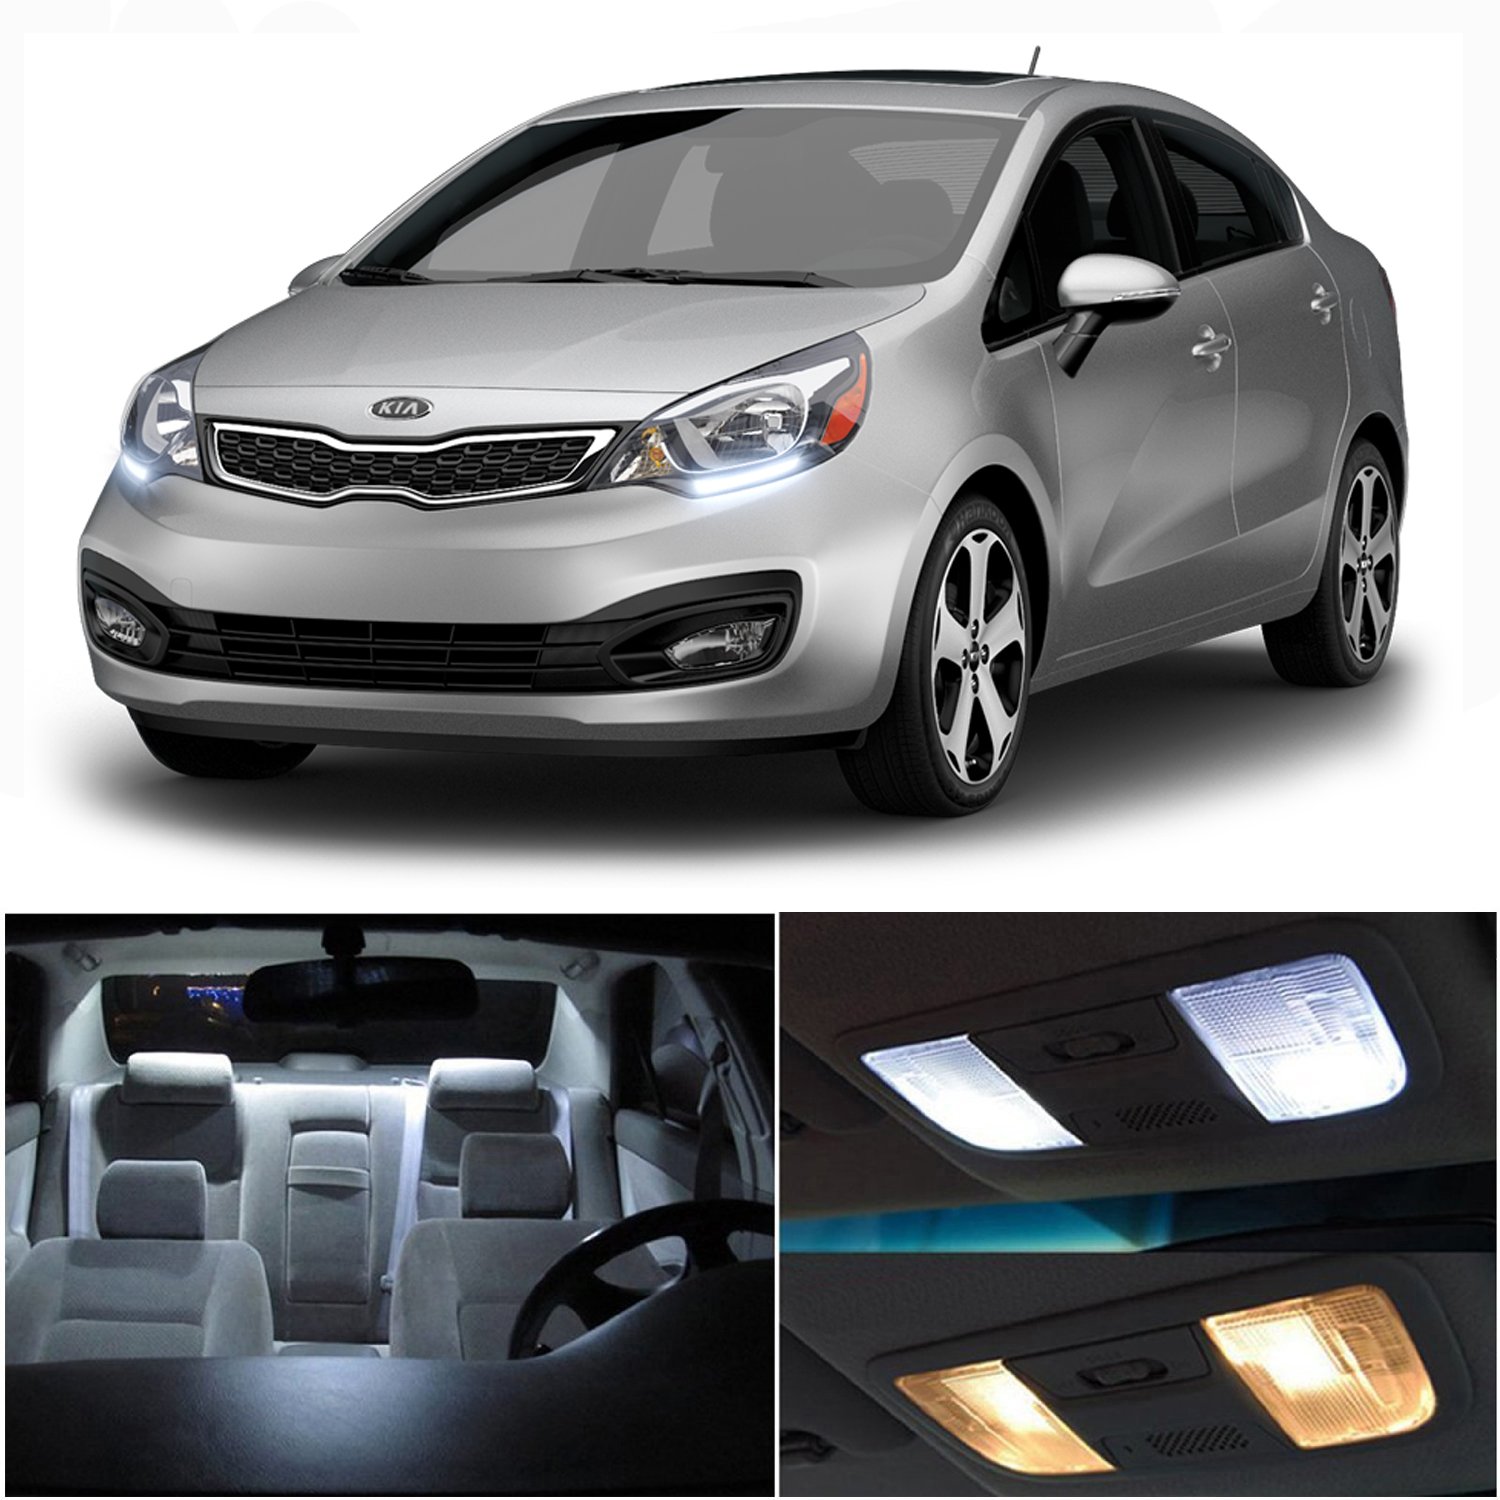 Amazon.com: LEDpartsNow Interior LED Lights Replacement for 2015 KIA RIO  SEDAN Accessories Package Kit (8 Bulbs), WHITE : Automotive